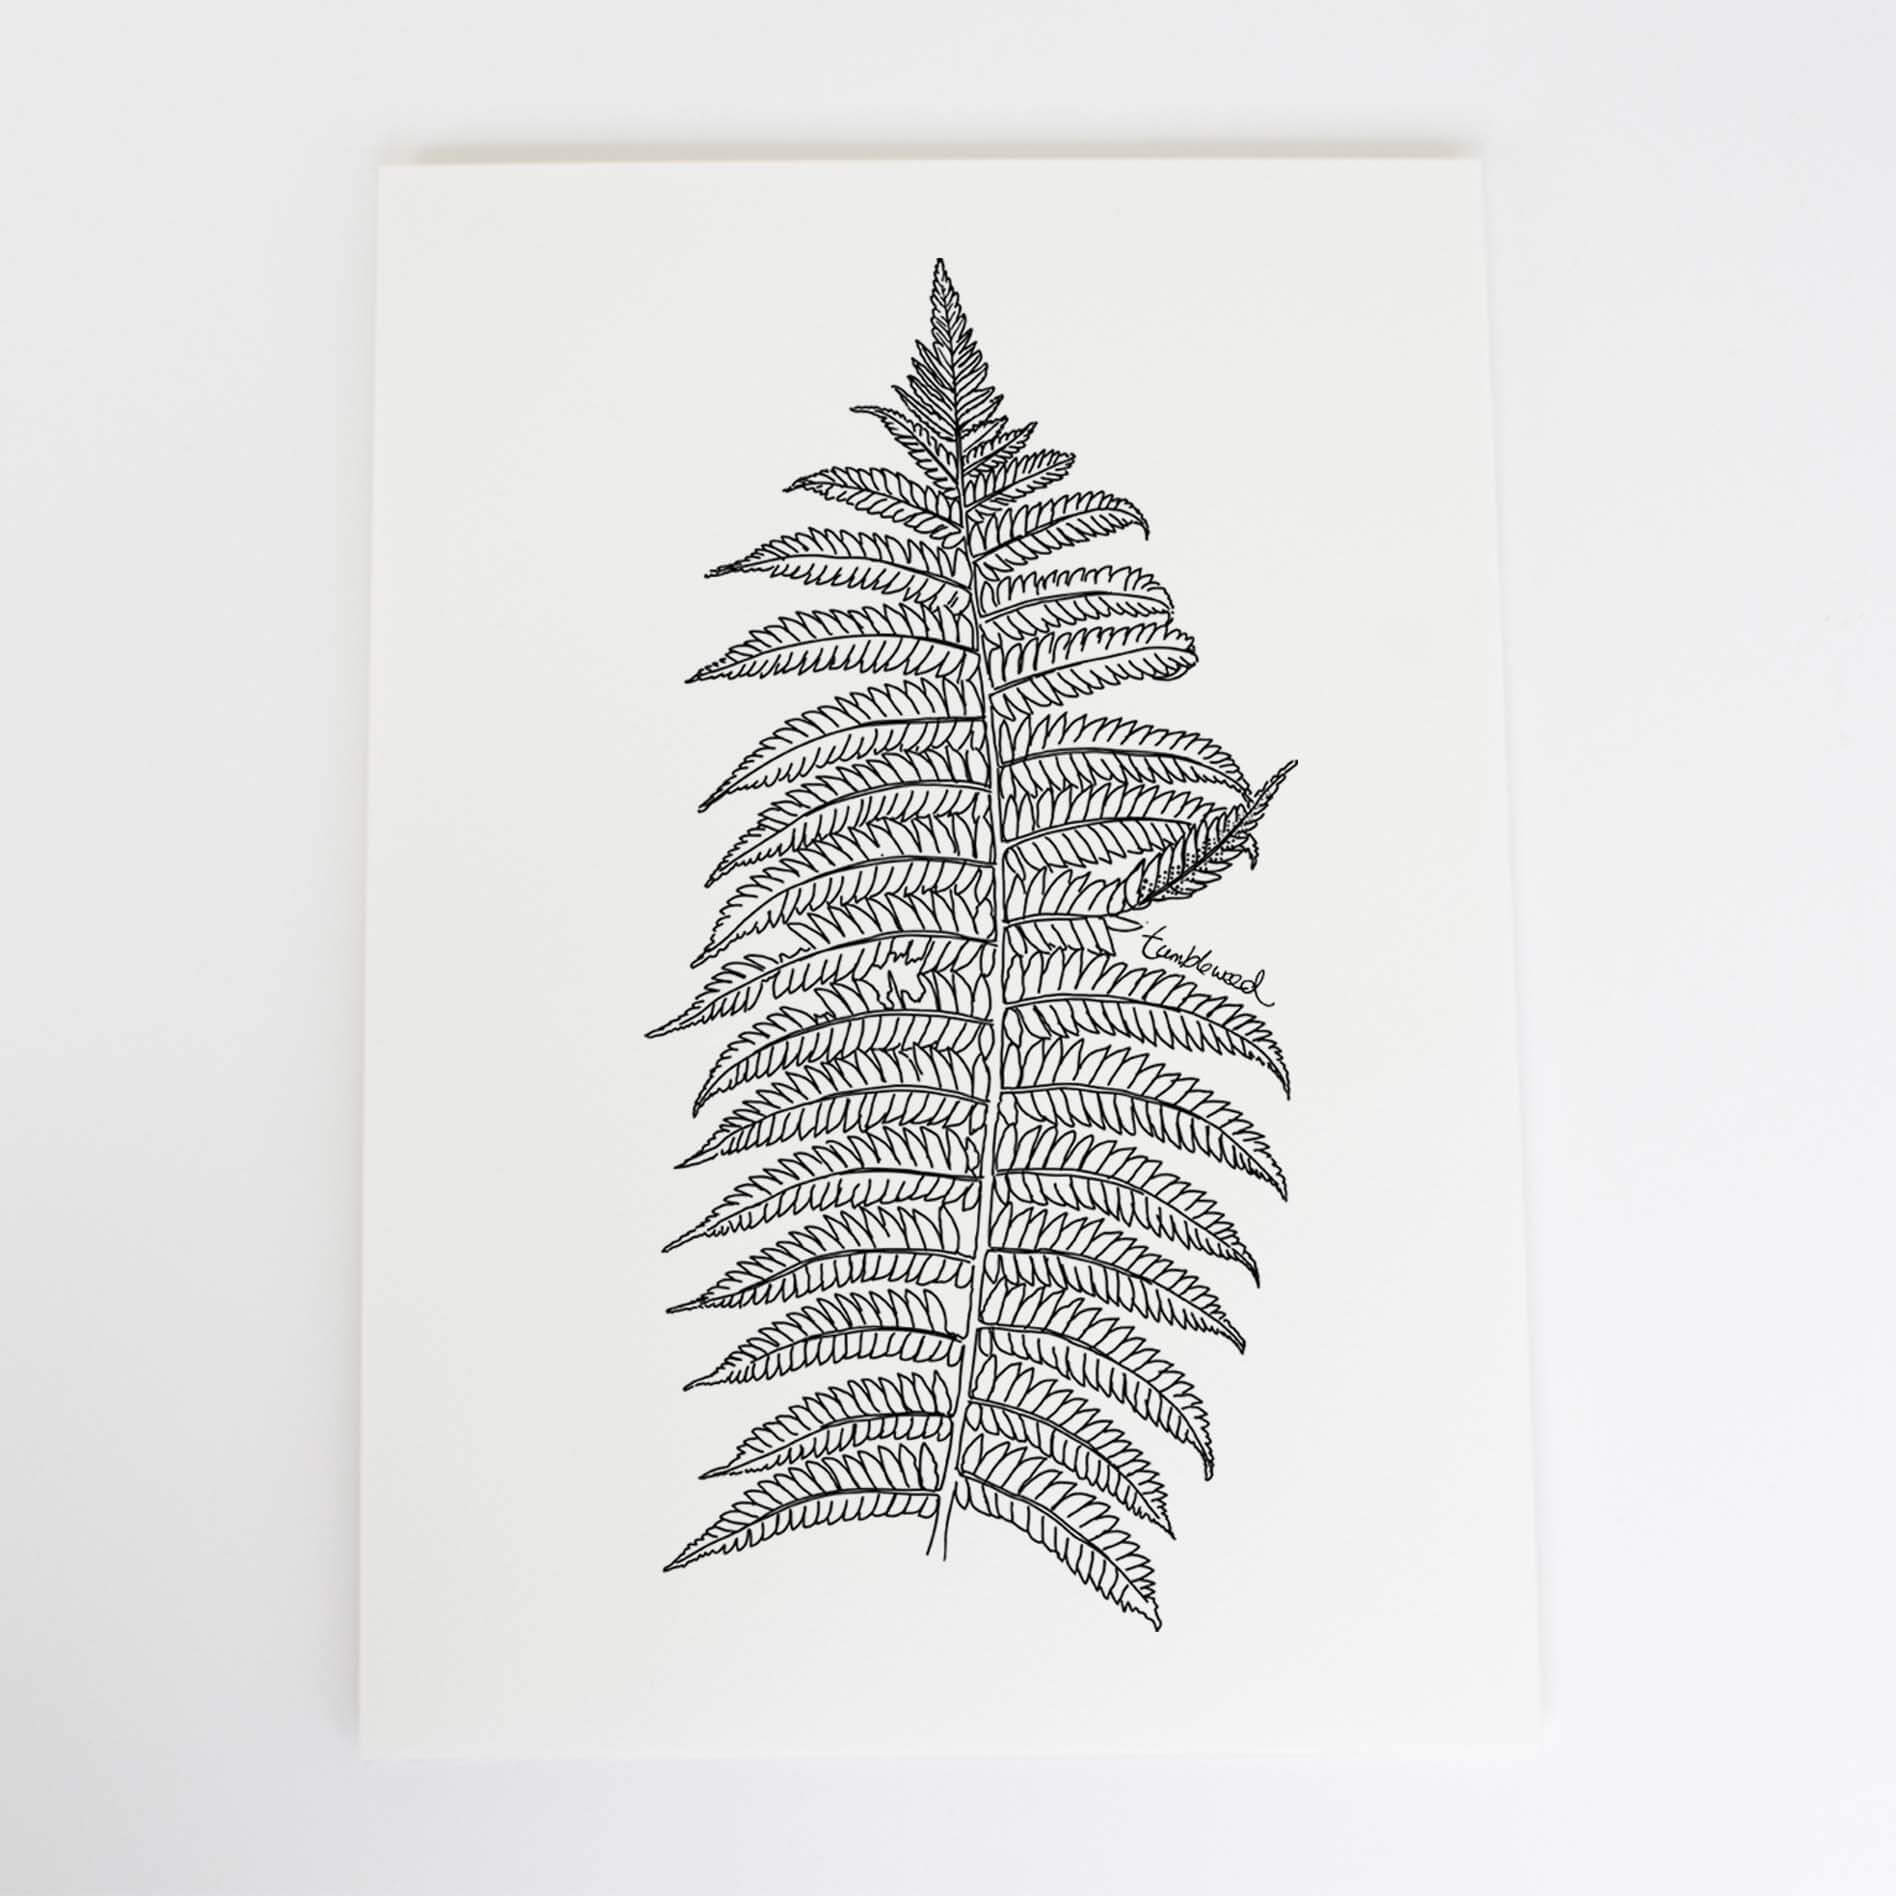 A4 art print of featuring Silver fern/ponga design on white archival paper.